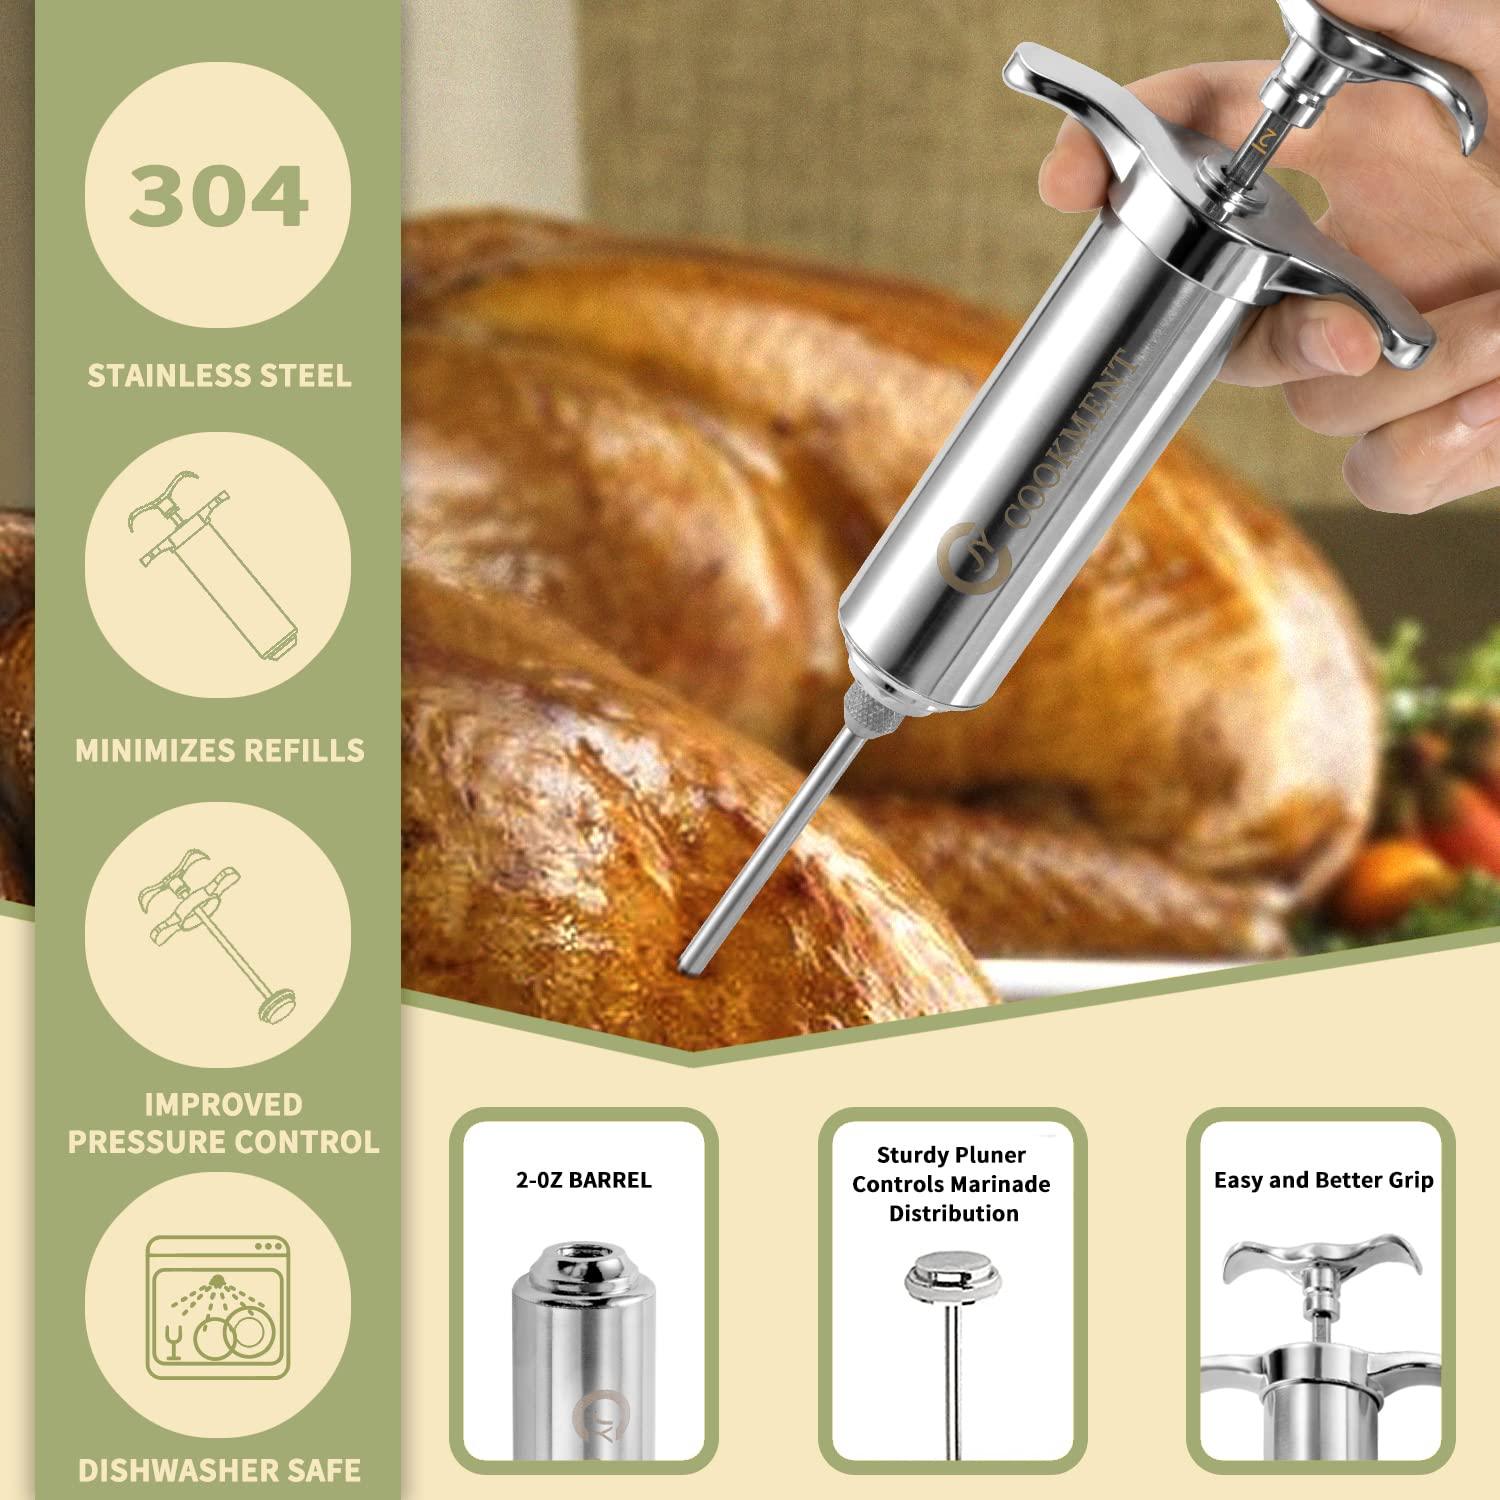 Meat Injector Syringe 2-oz Marinade Flavor Barrel 304 Stainless Steel with 3 Marinade Needles, Travel Case for BBQ Grill Smoker, Turkey, Brisket, Paper Instruction and E-book Included by JY COOKMENT - CookCave